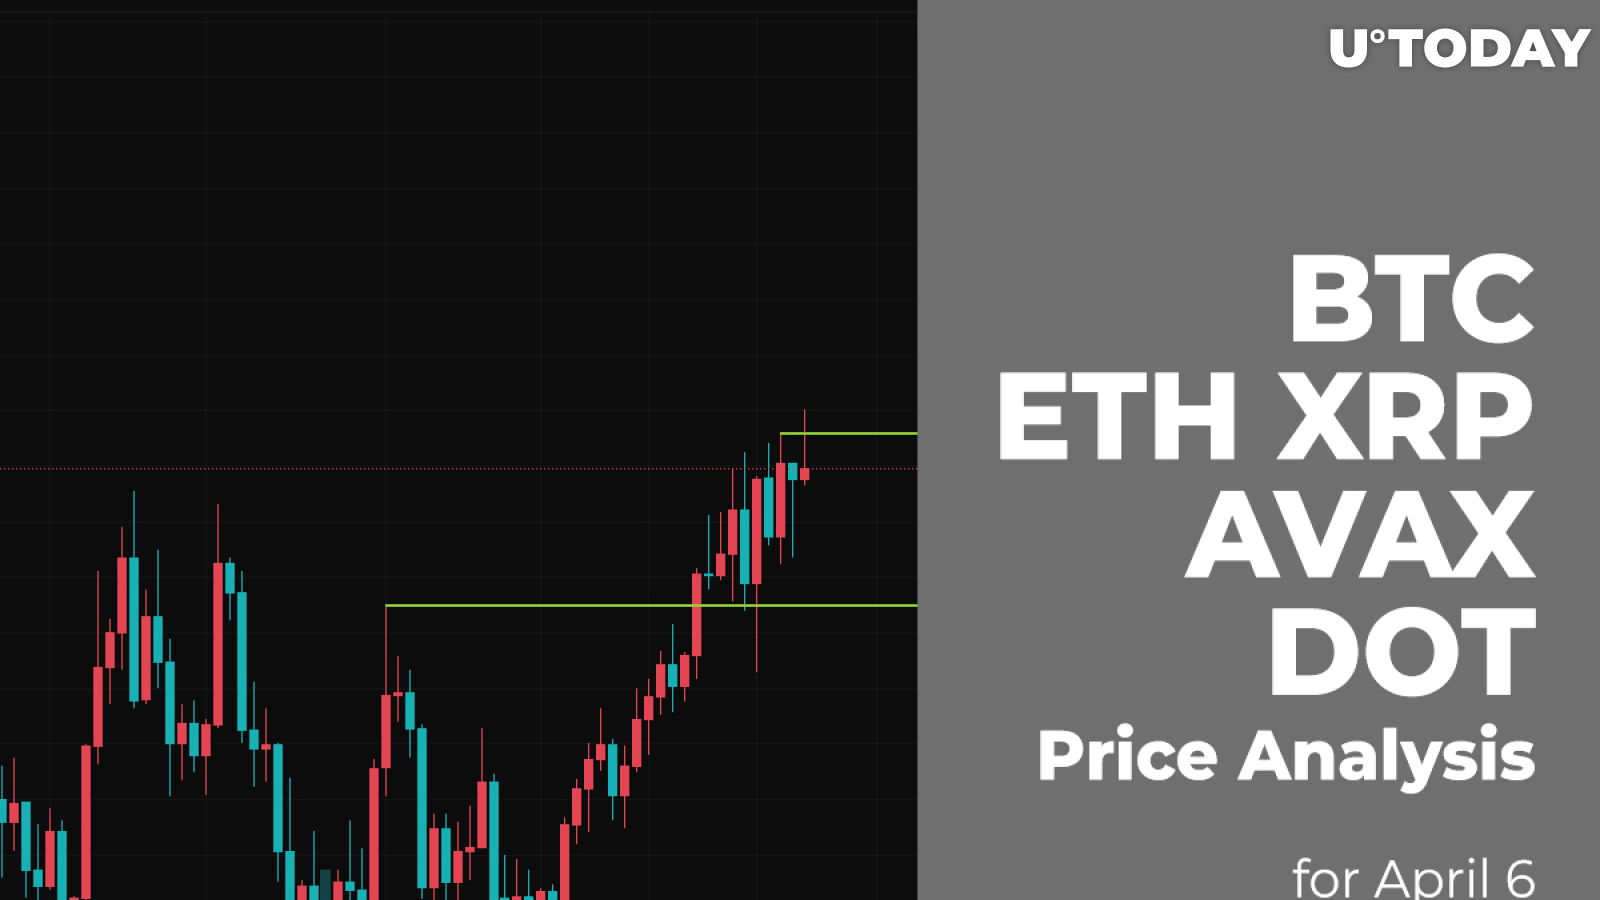 BTC, ETH, XRP, AVAX and DOT Price Analysis for April 6